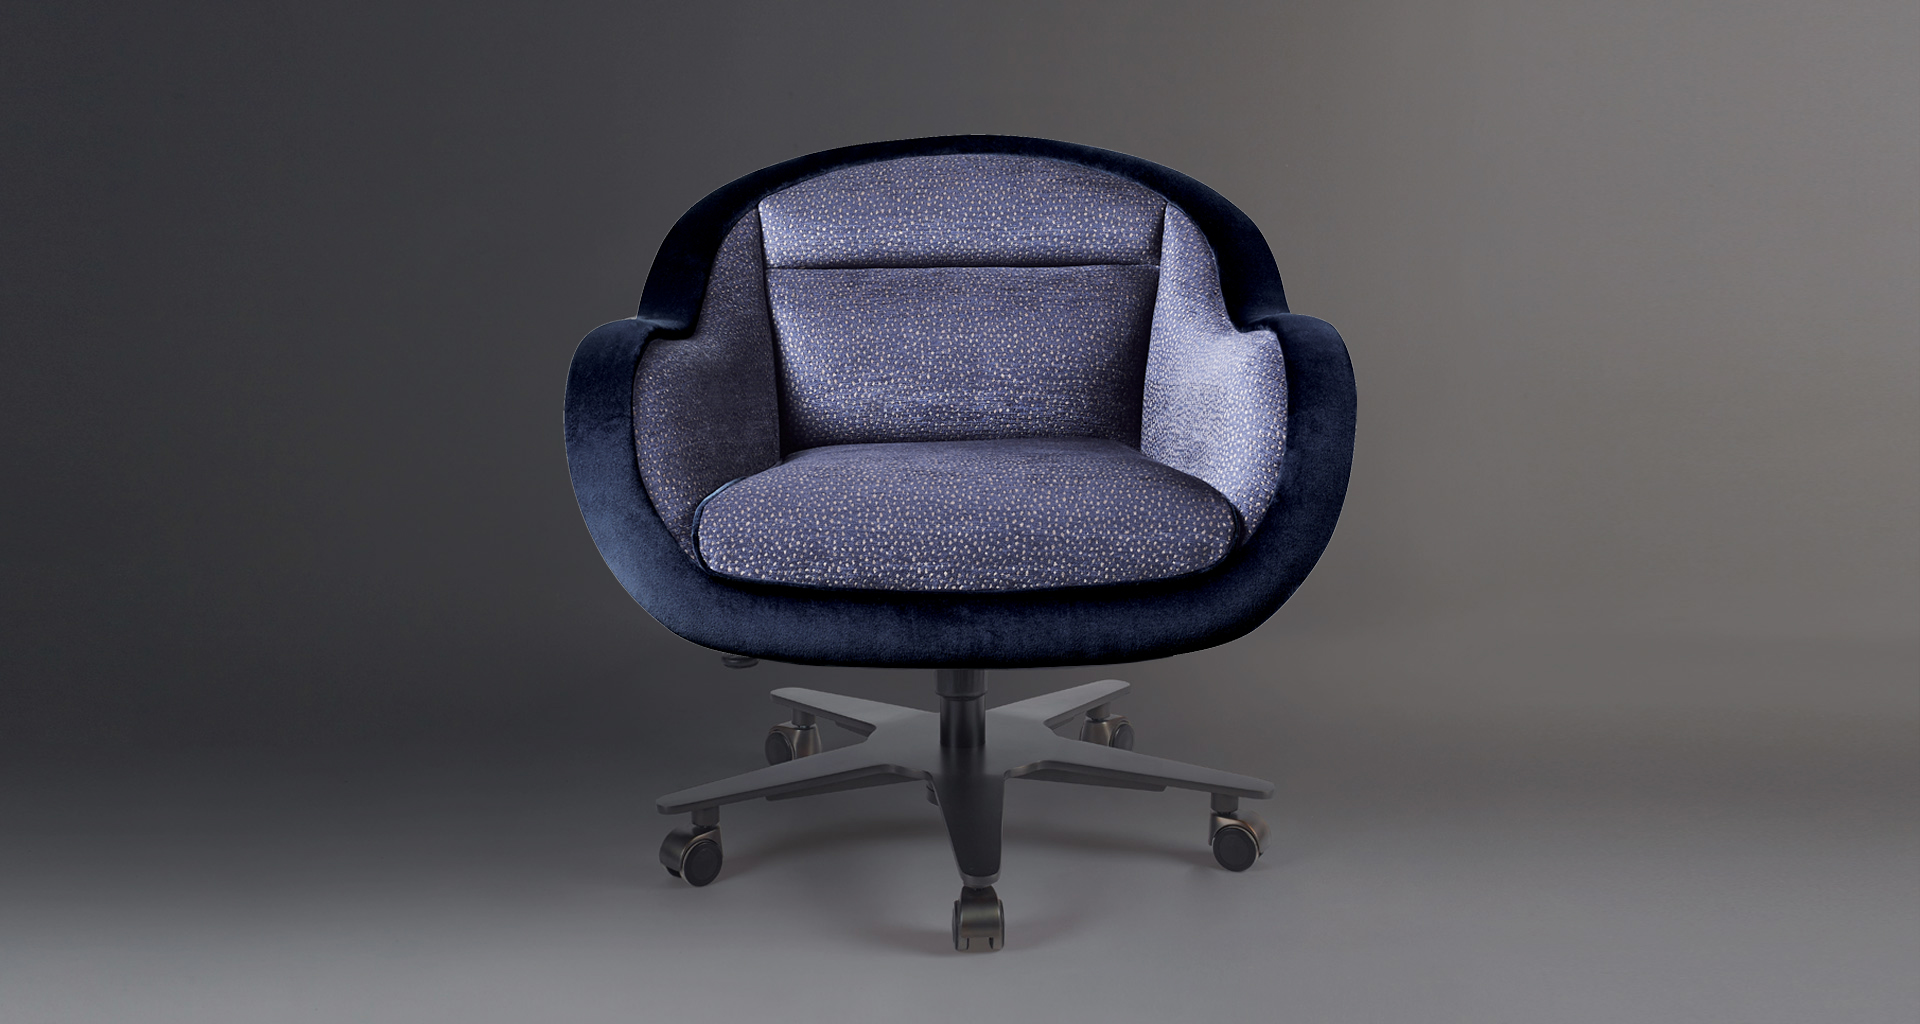 Vittoria is an office chair with a metal or bronze base, covered in fabric or leather with a bronze handle on the back, from Promemoria's catalogue | Promemoria